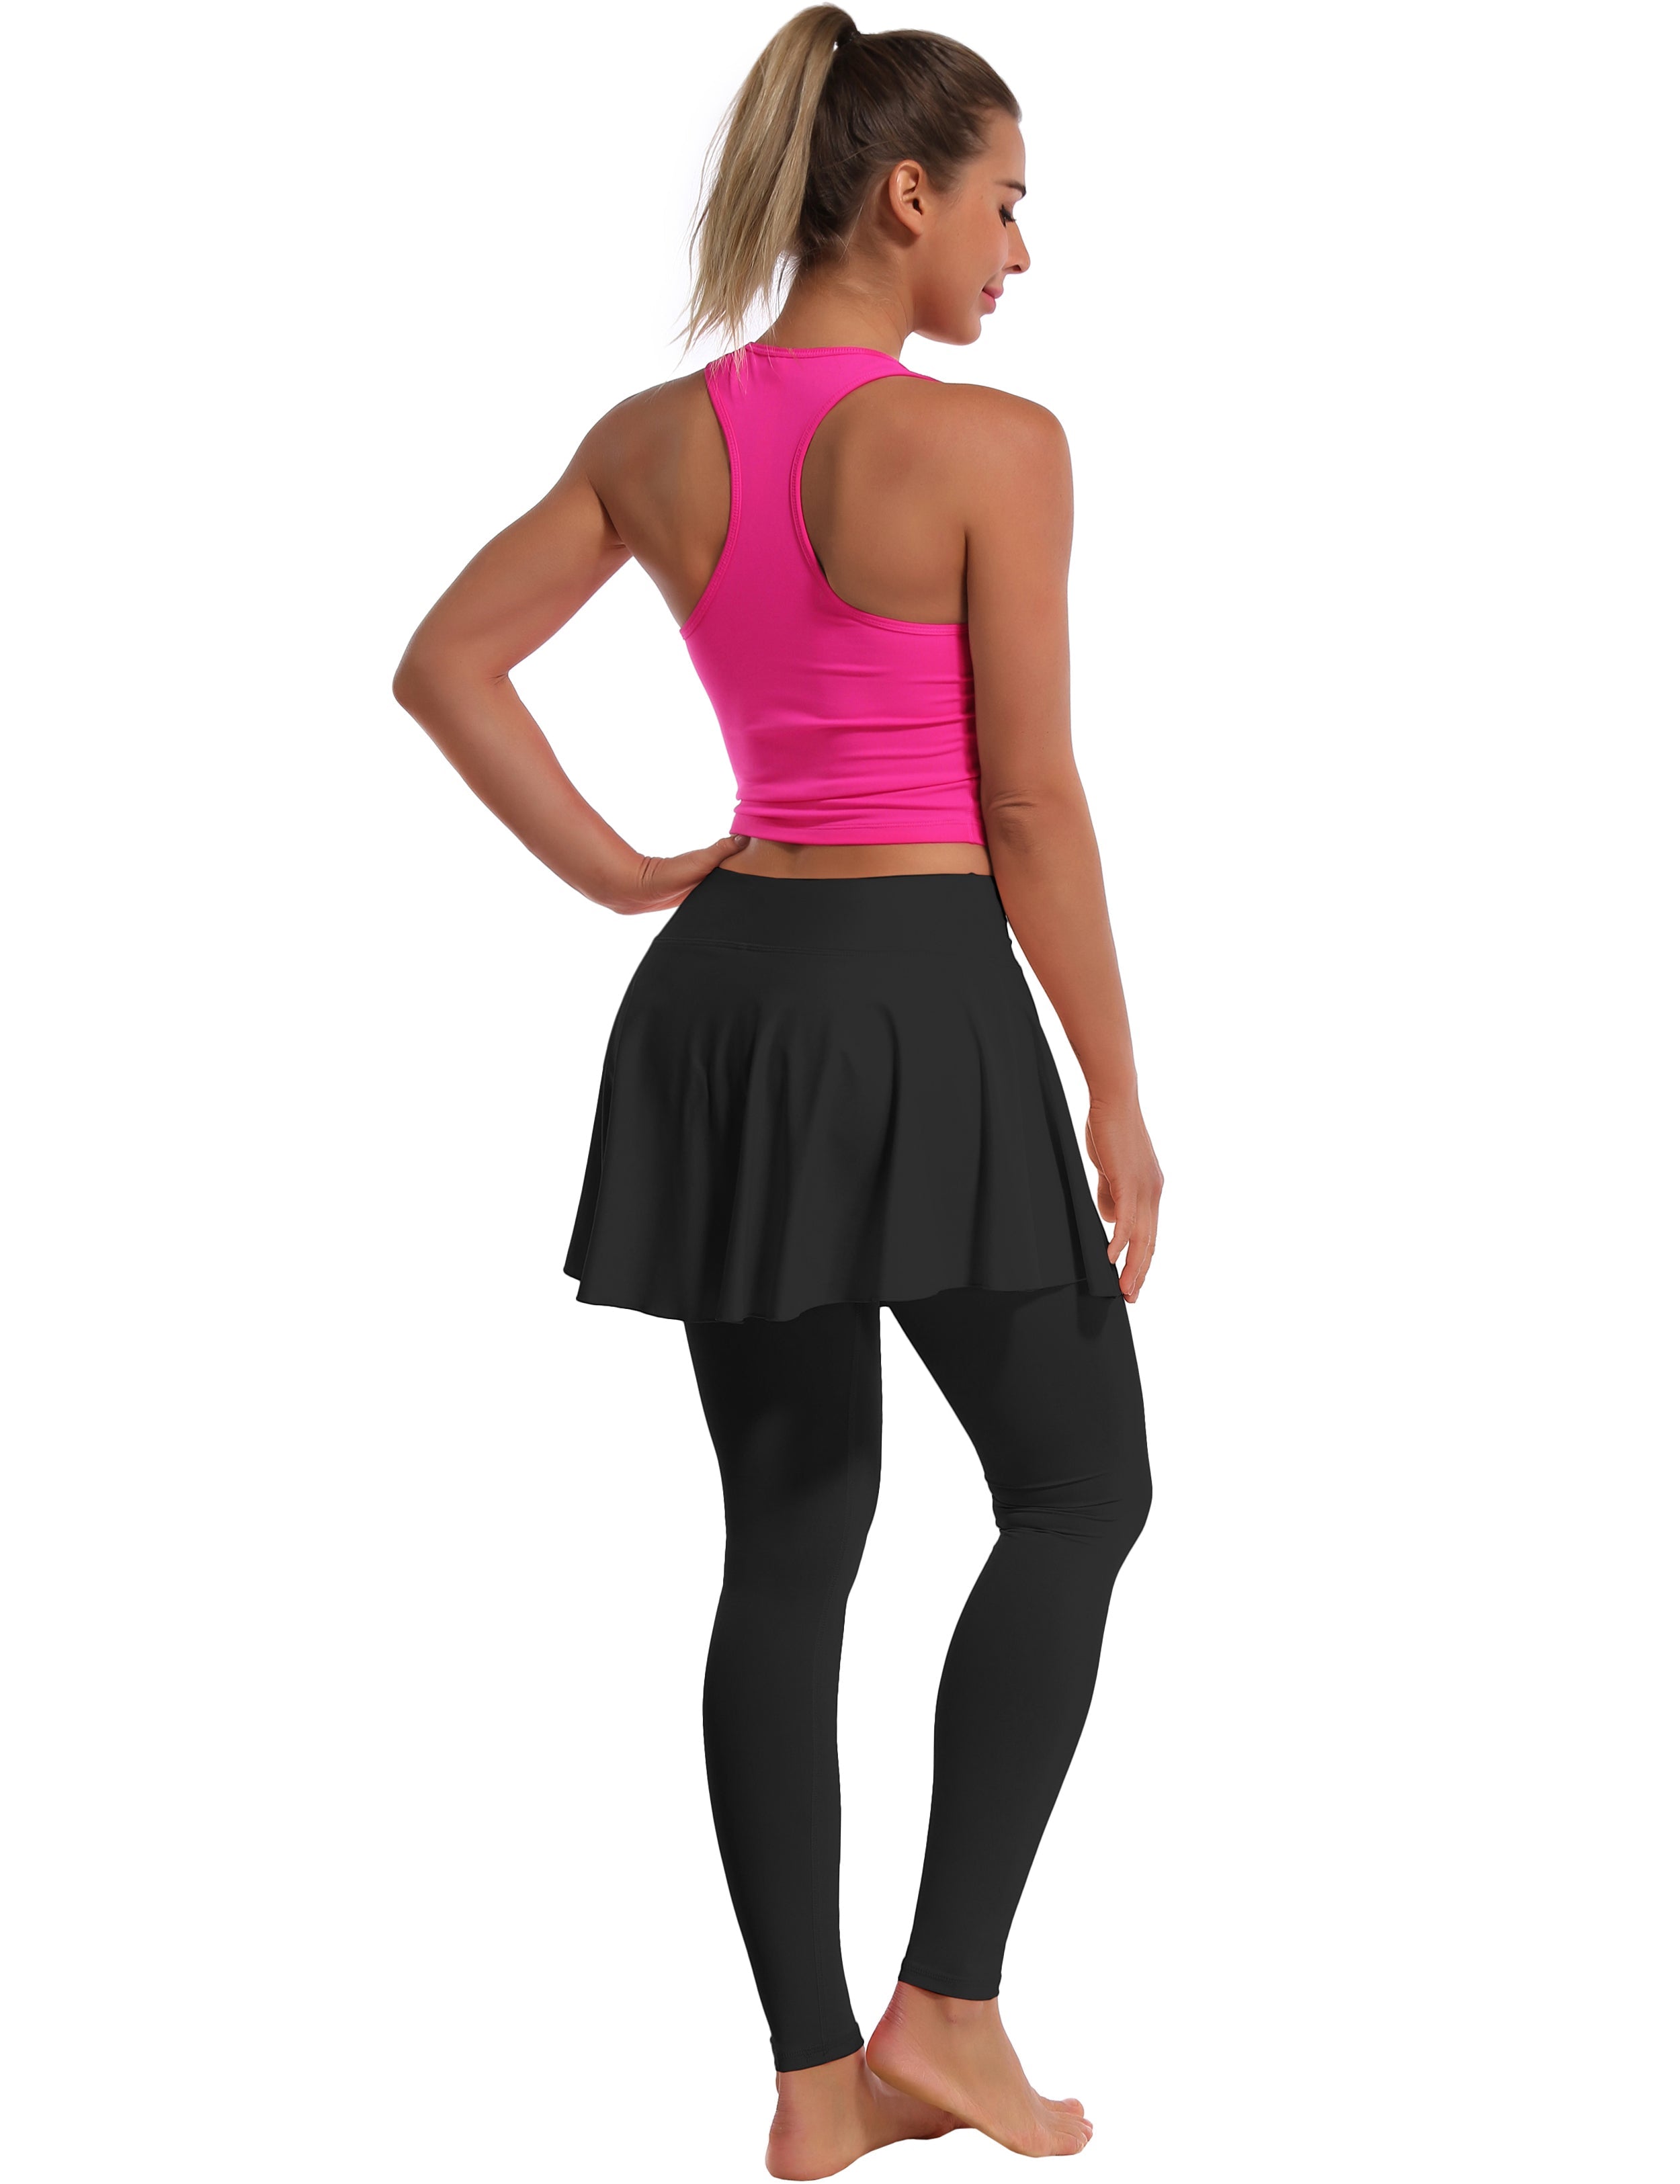 Athletic Tennis Golf Skort with Pocket Shorts black 80%Nylon/20%Spandex UPF 50+ sun protection Elastic closure Lightweight, Wrinkle Moisture wicking Quick drying Secure & comfortable two layer Hidden pocket